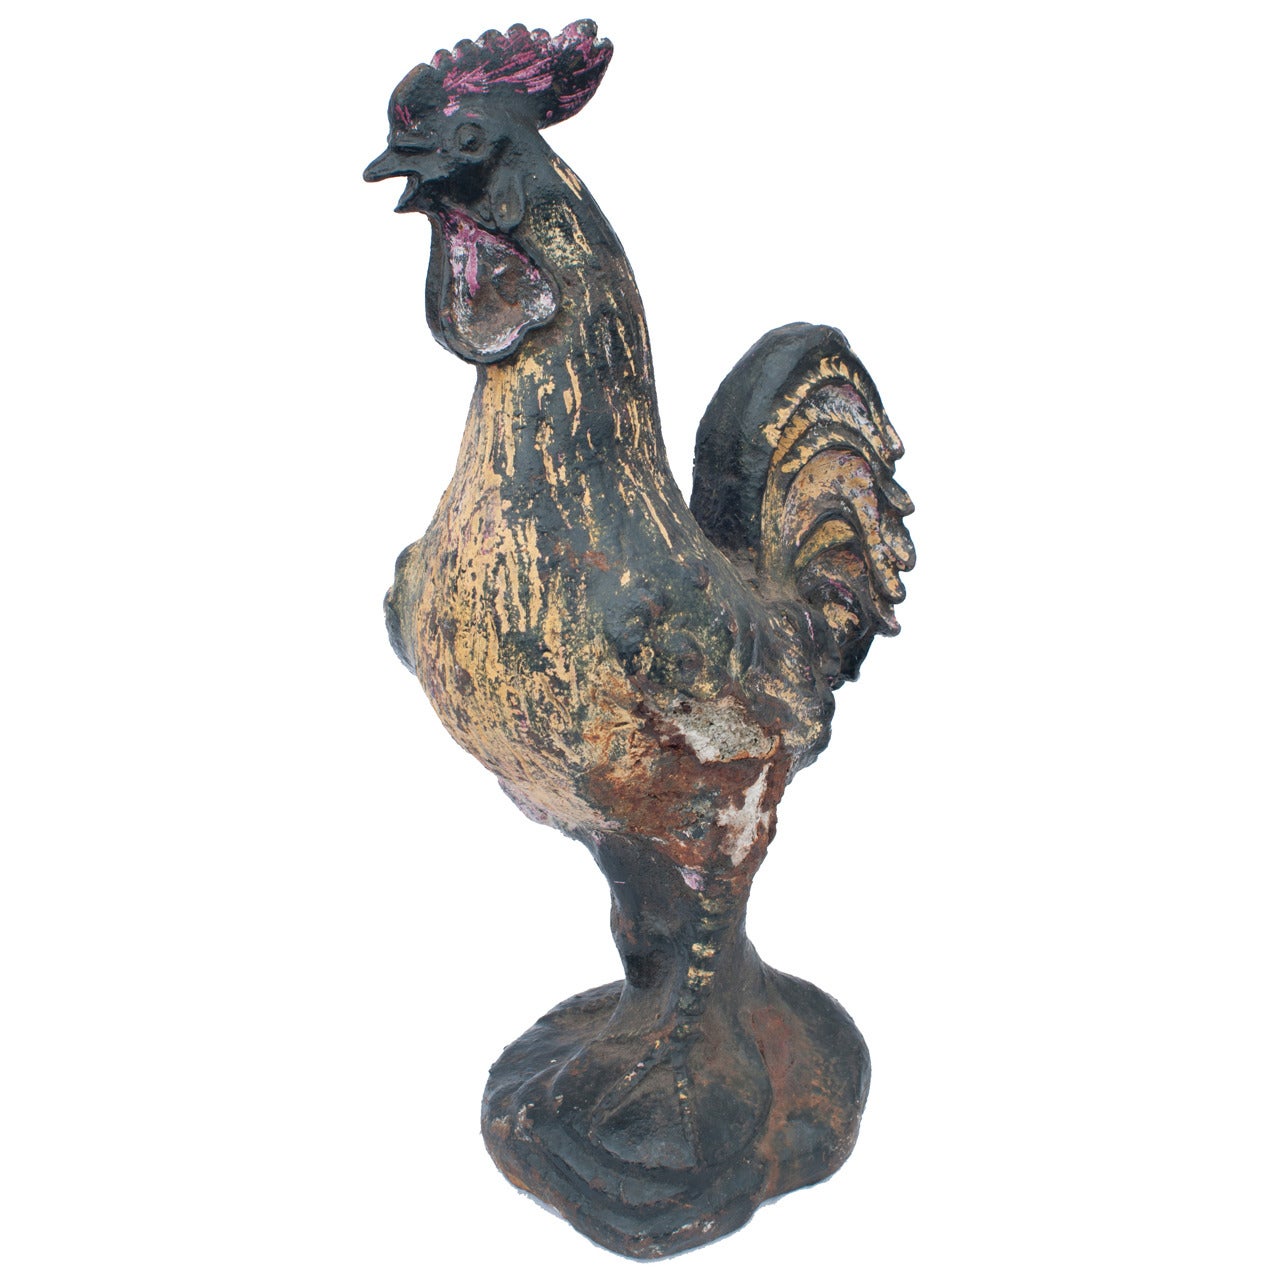 Very Rare Painted Rooster Sculpture